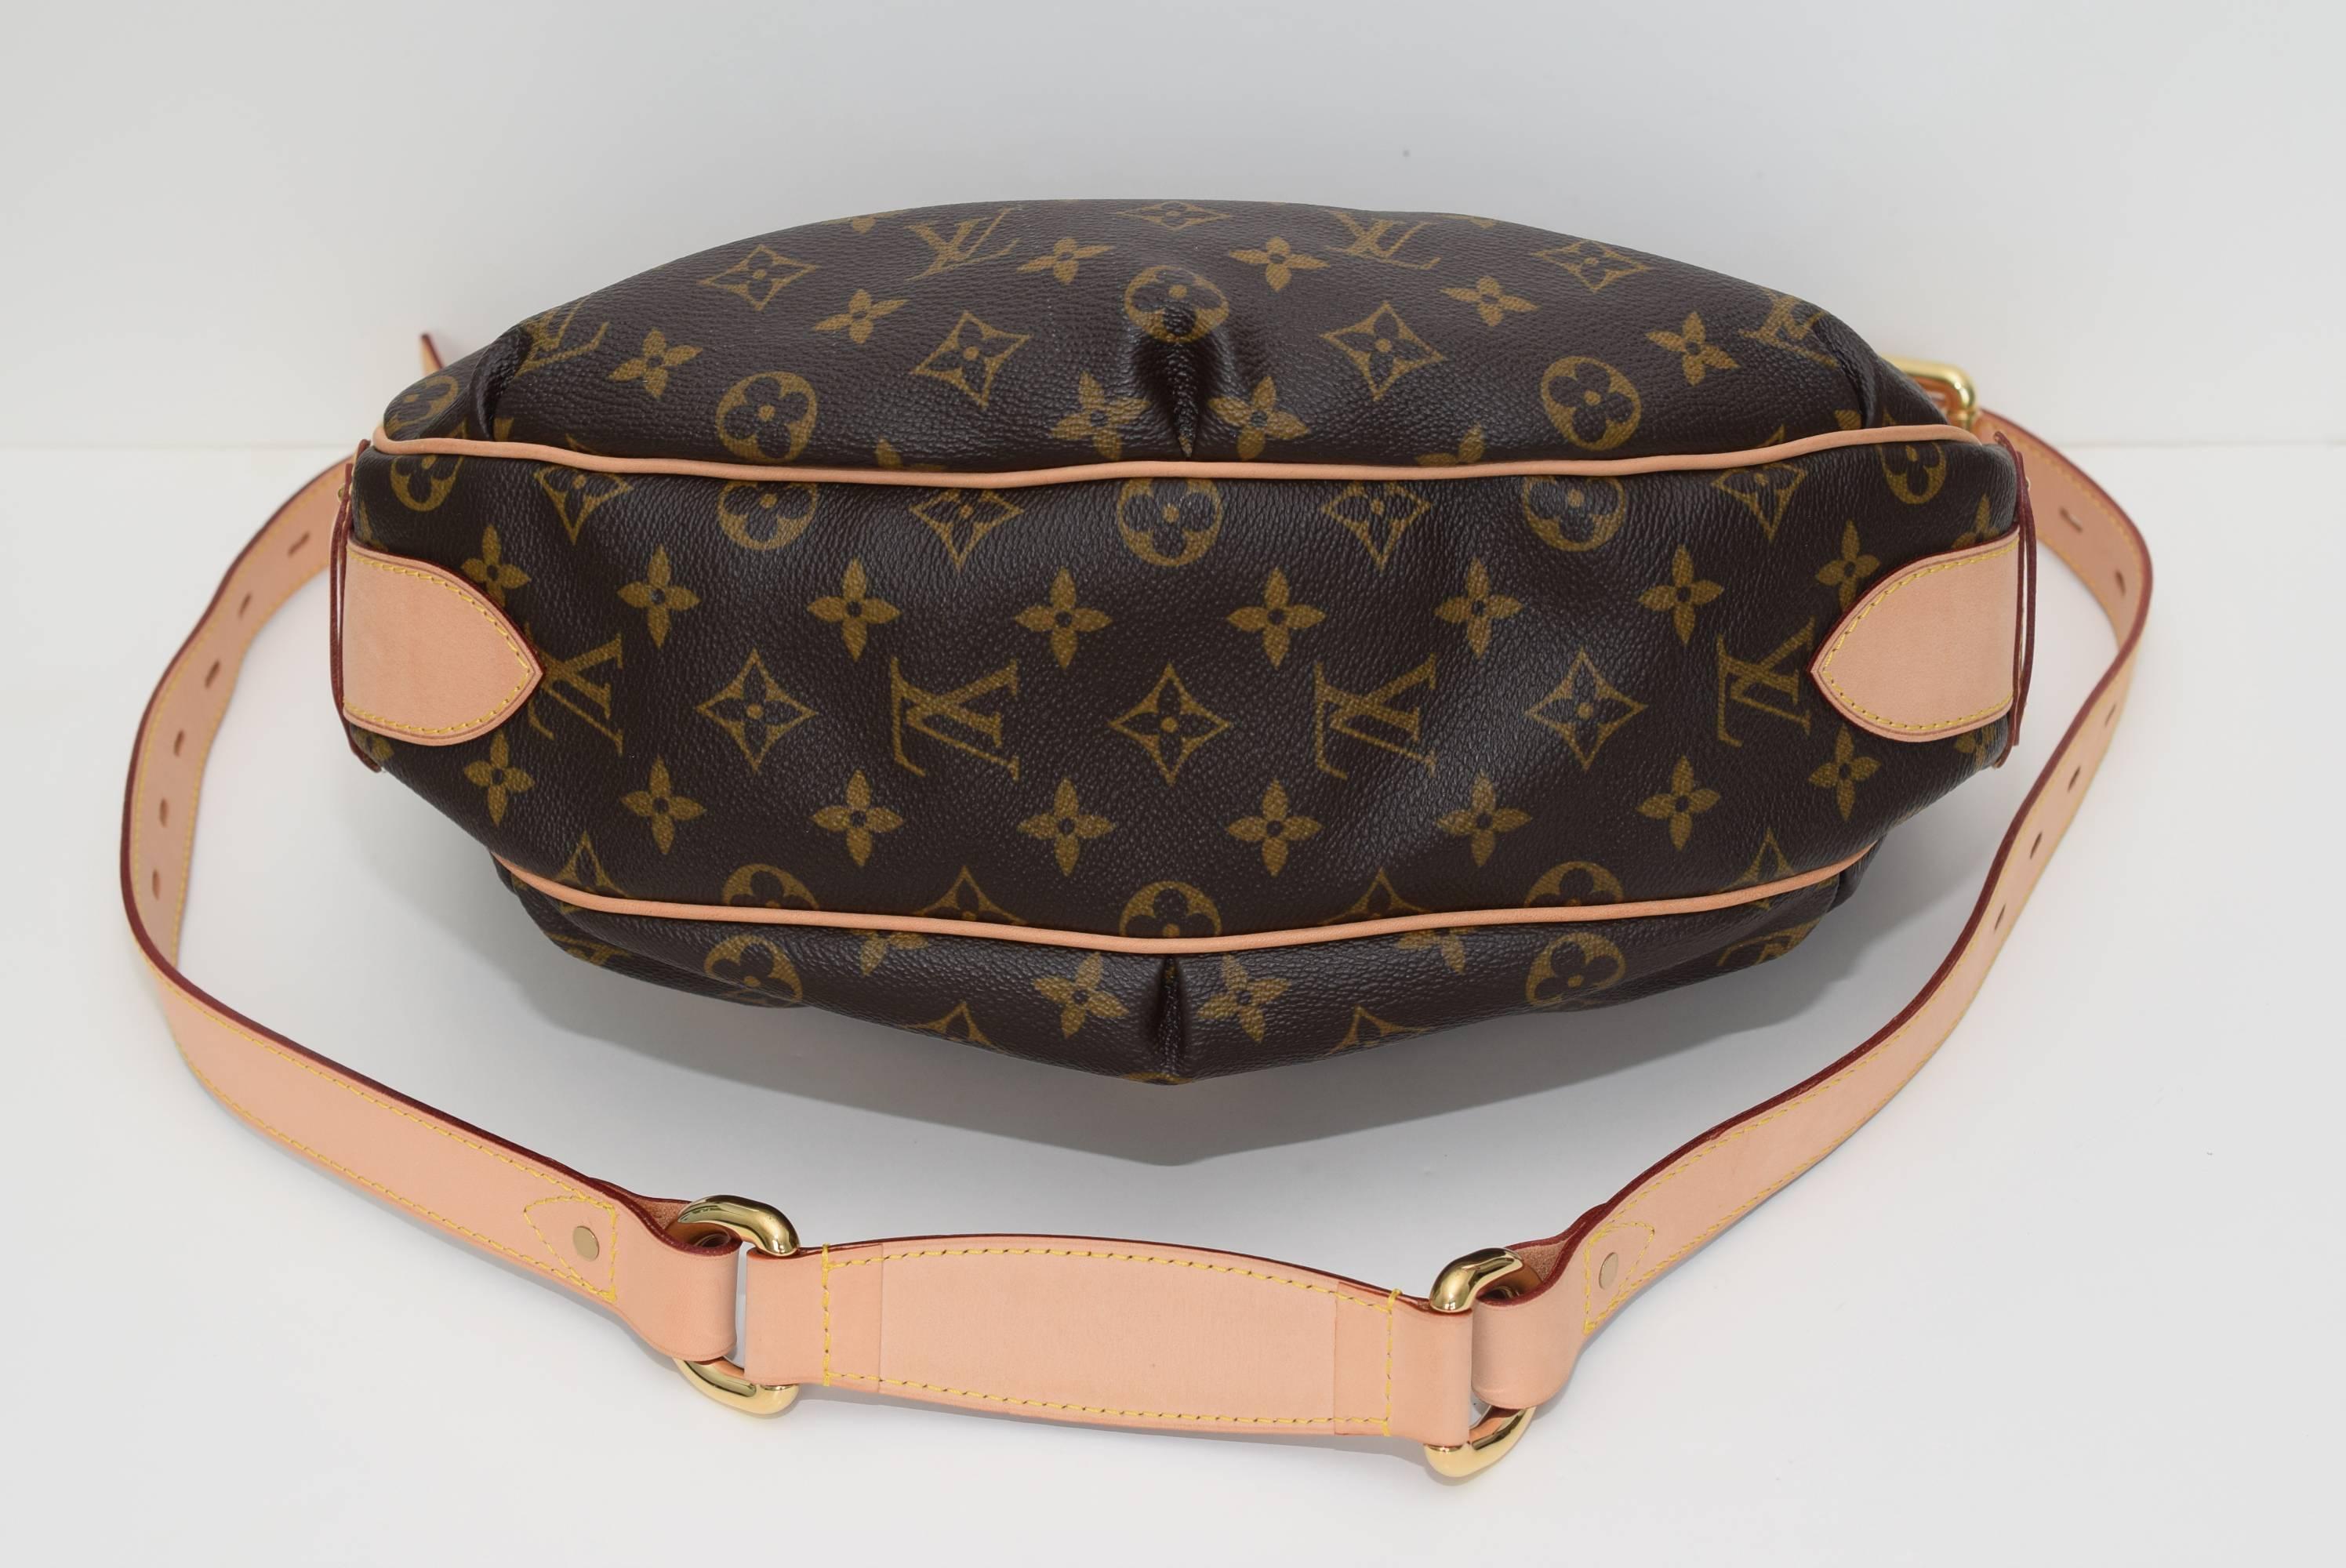 Women's or Men's LOUIS VUITTON Tulum Gm In Like New Condition. Date Code: Ca0026 Made In Spain Mo